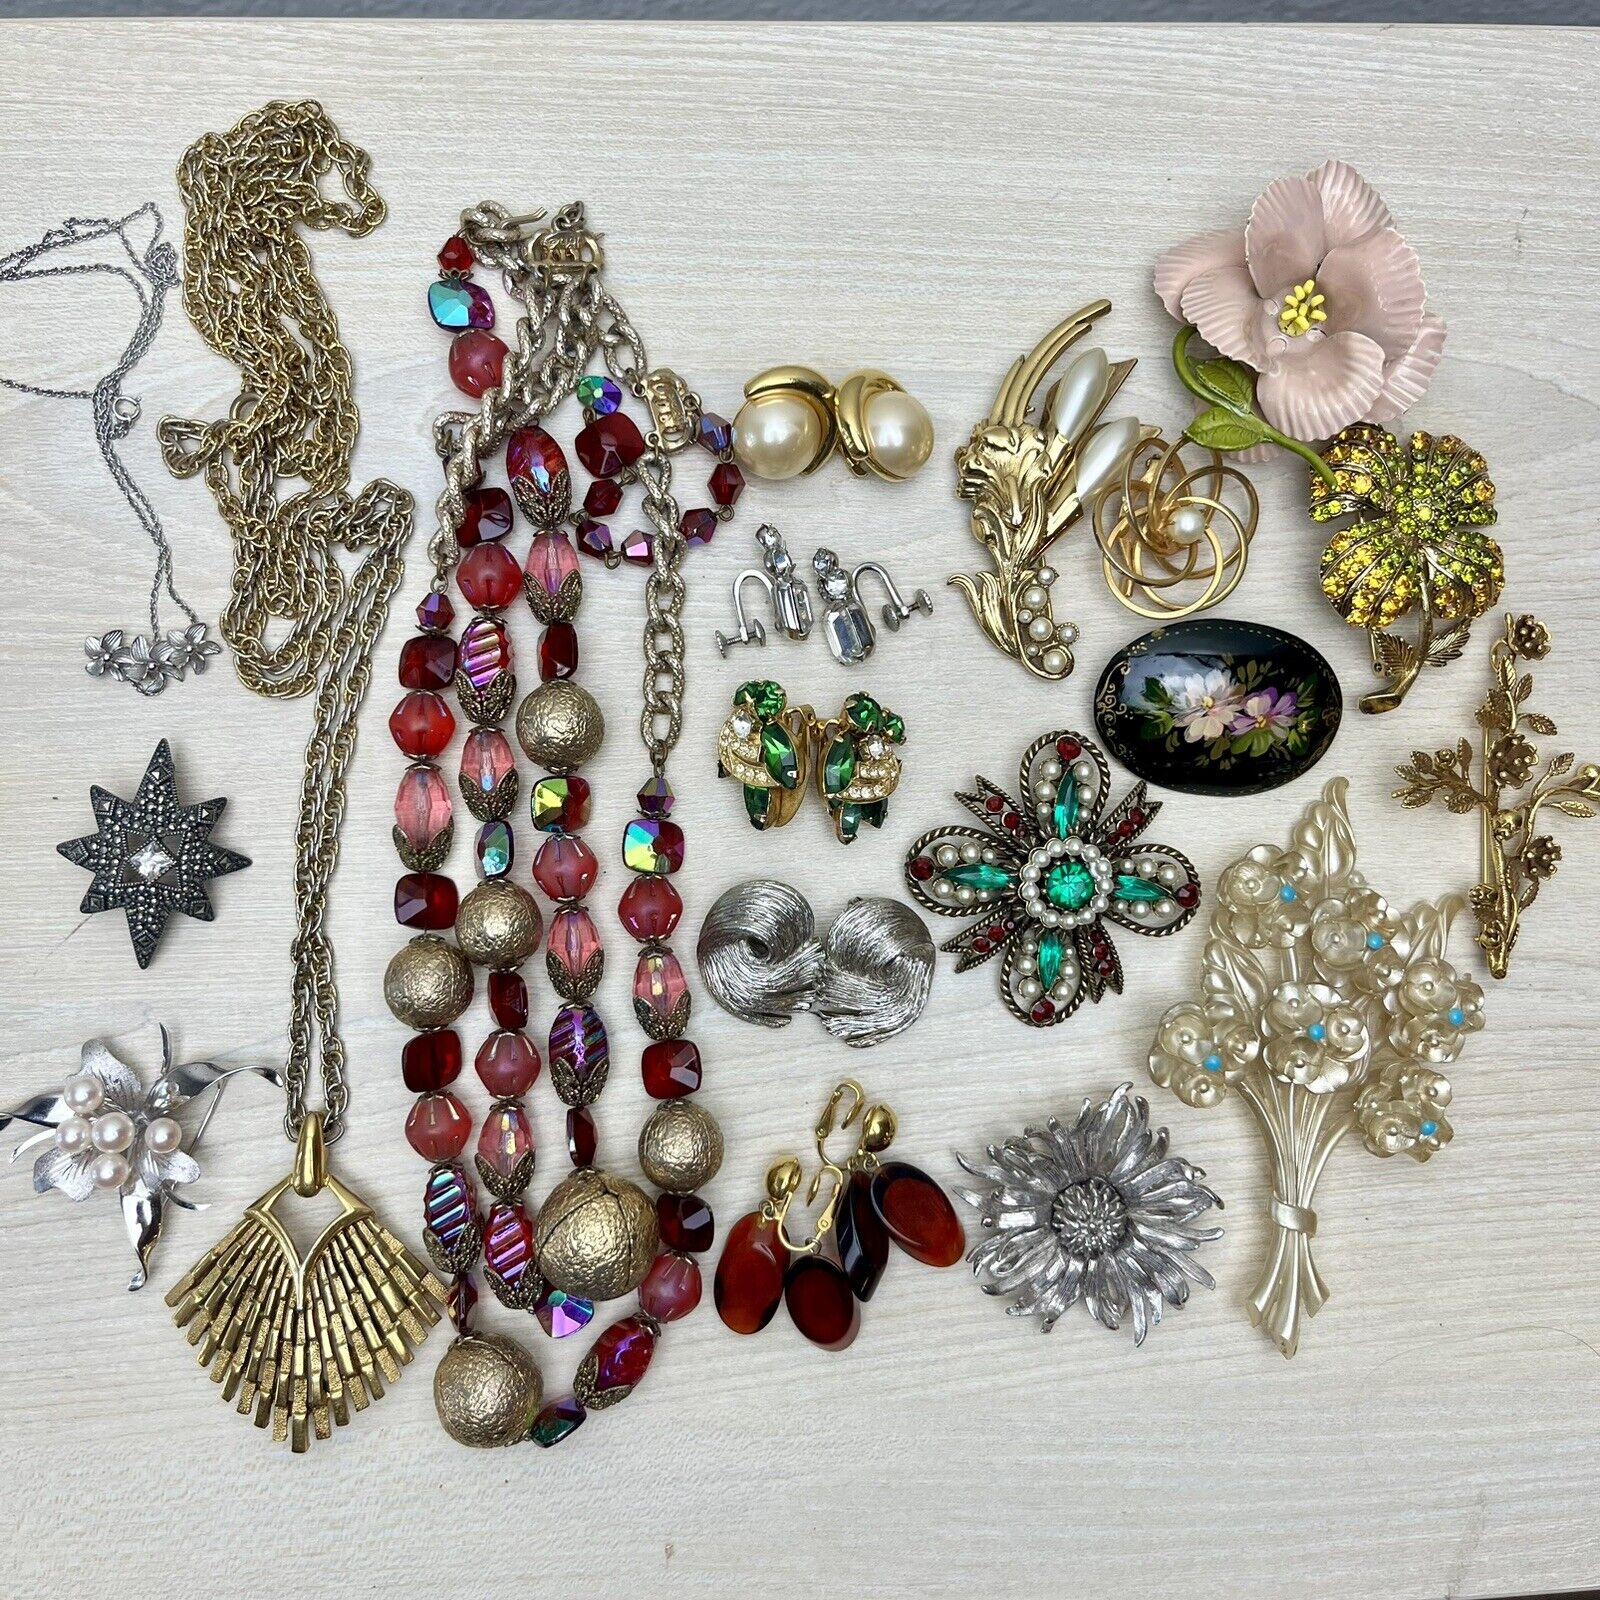 Vintage Estate Jewelry Lot Many Signed Hobe Crown Cipullo Trifari Weiss 19 Piece